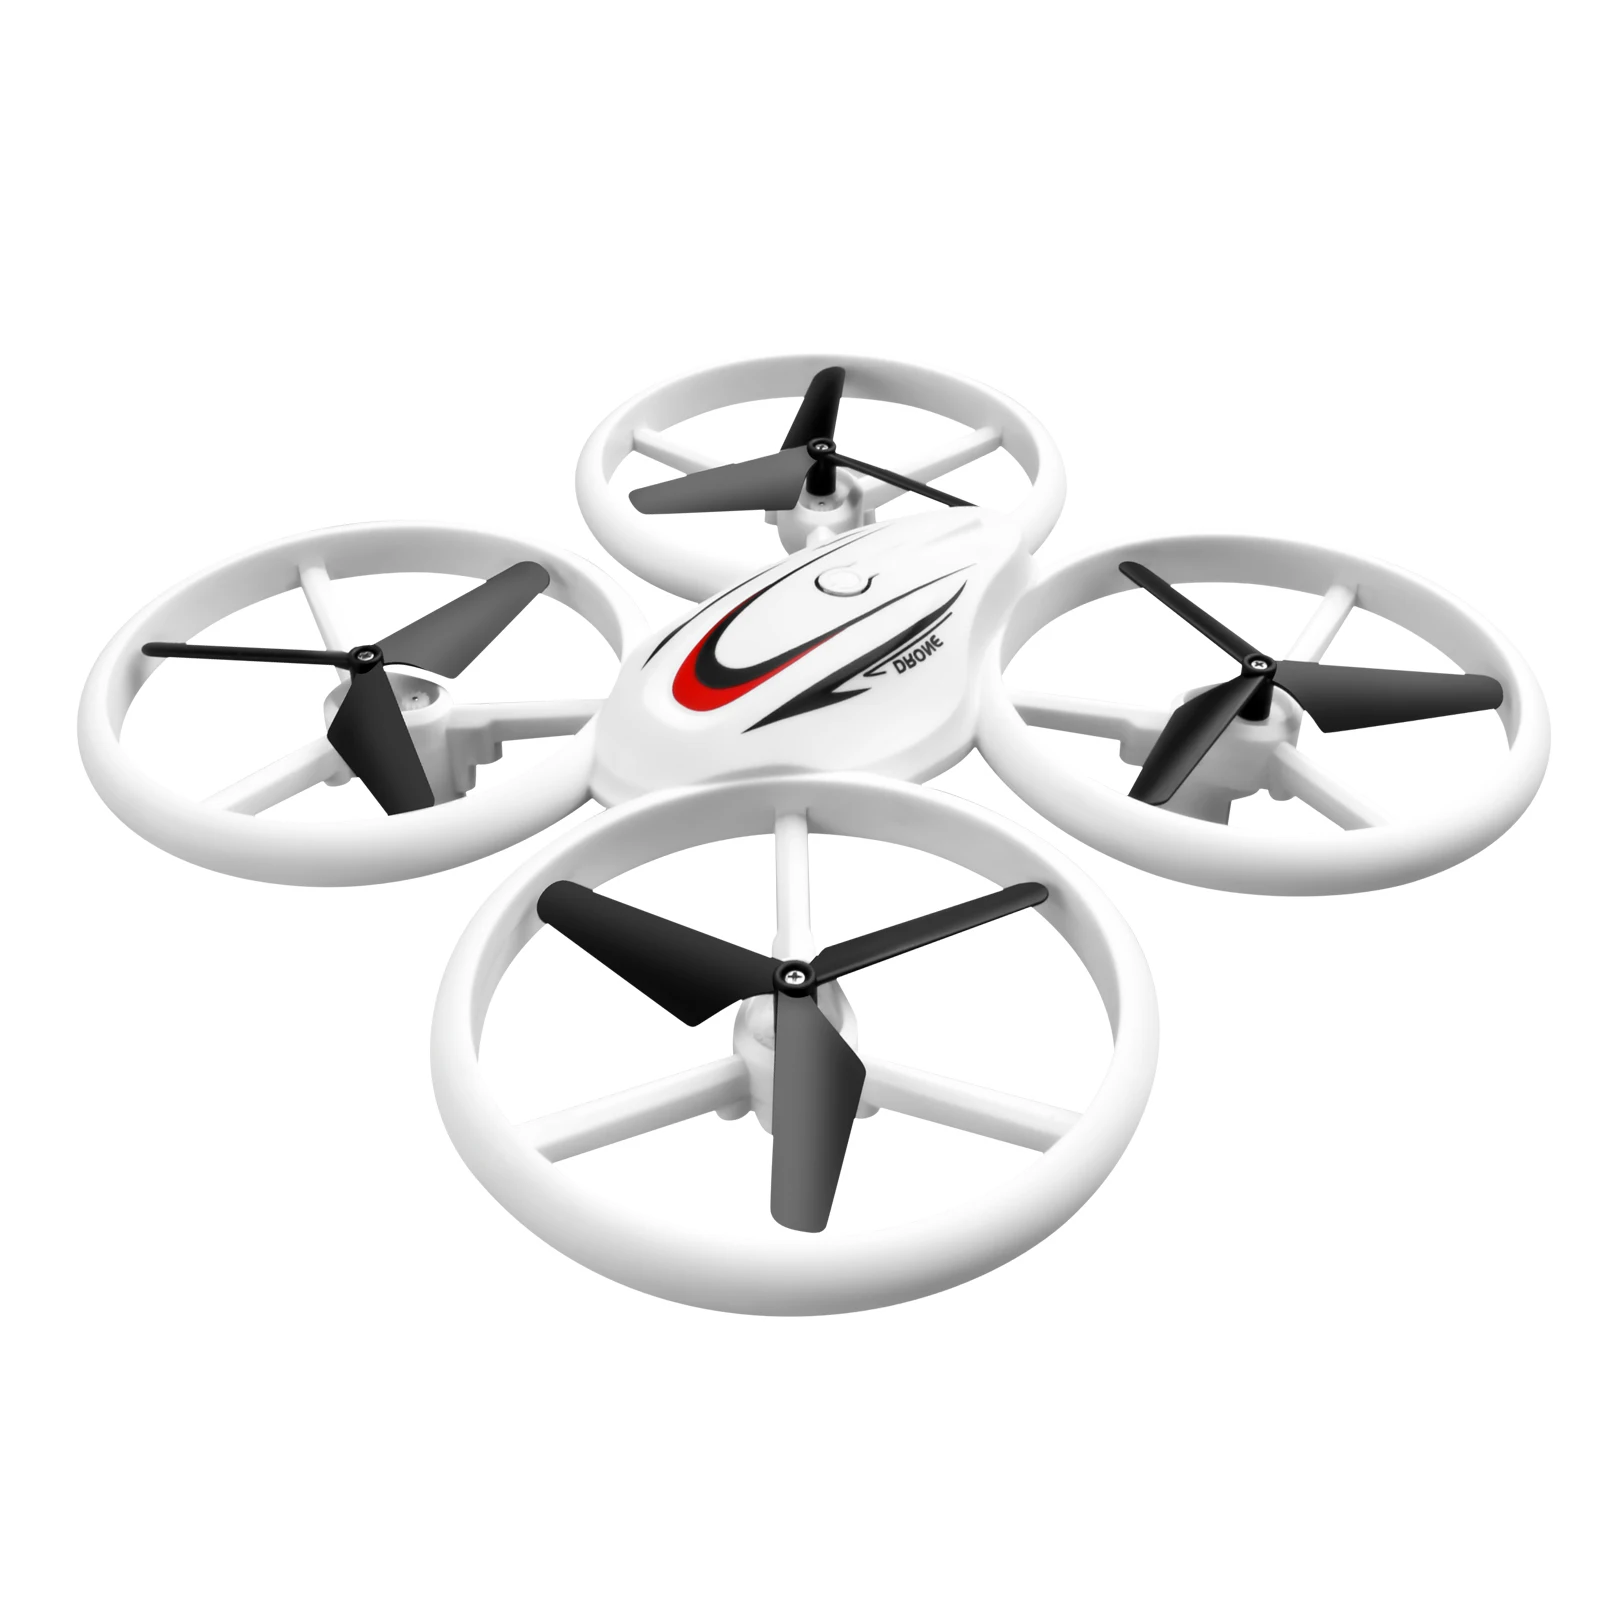 

S123 Rc Mini Quadcopter Drone Remote Control Aircraft Radio Control Ufo Hand Control Altitude Hold Helicopter Toys For Kids Boy